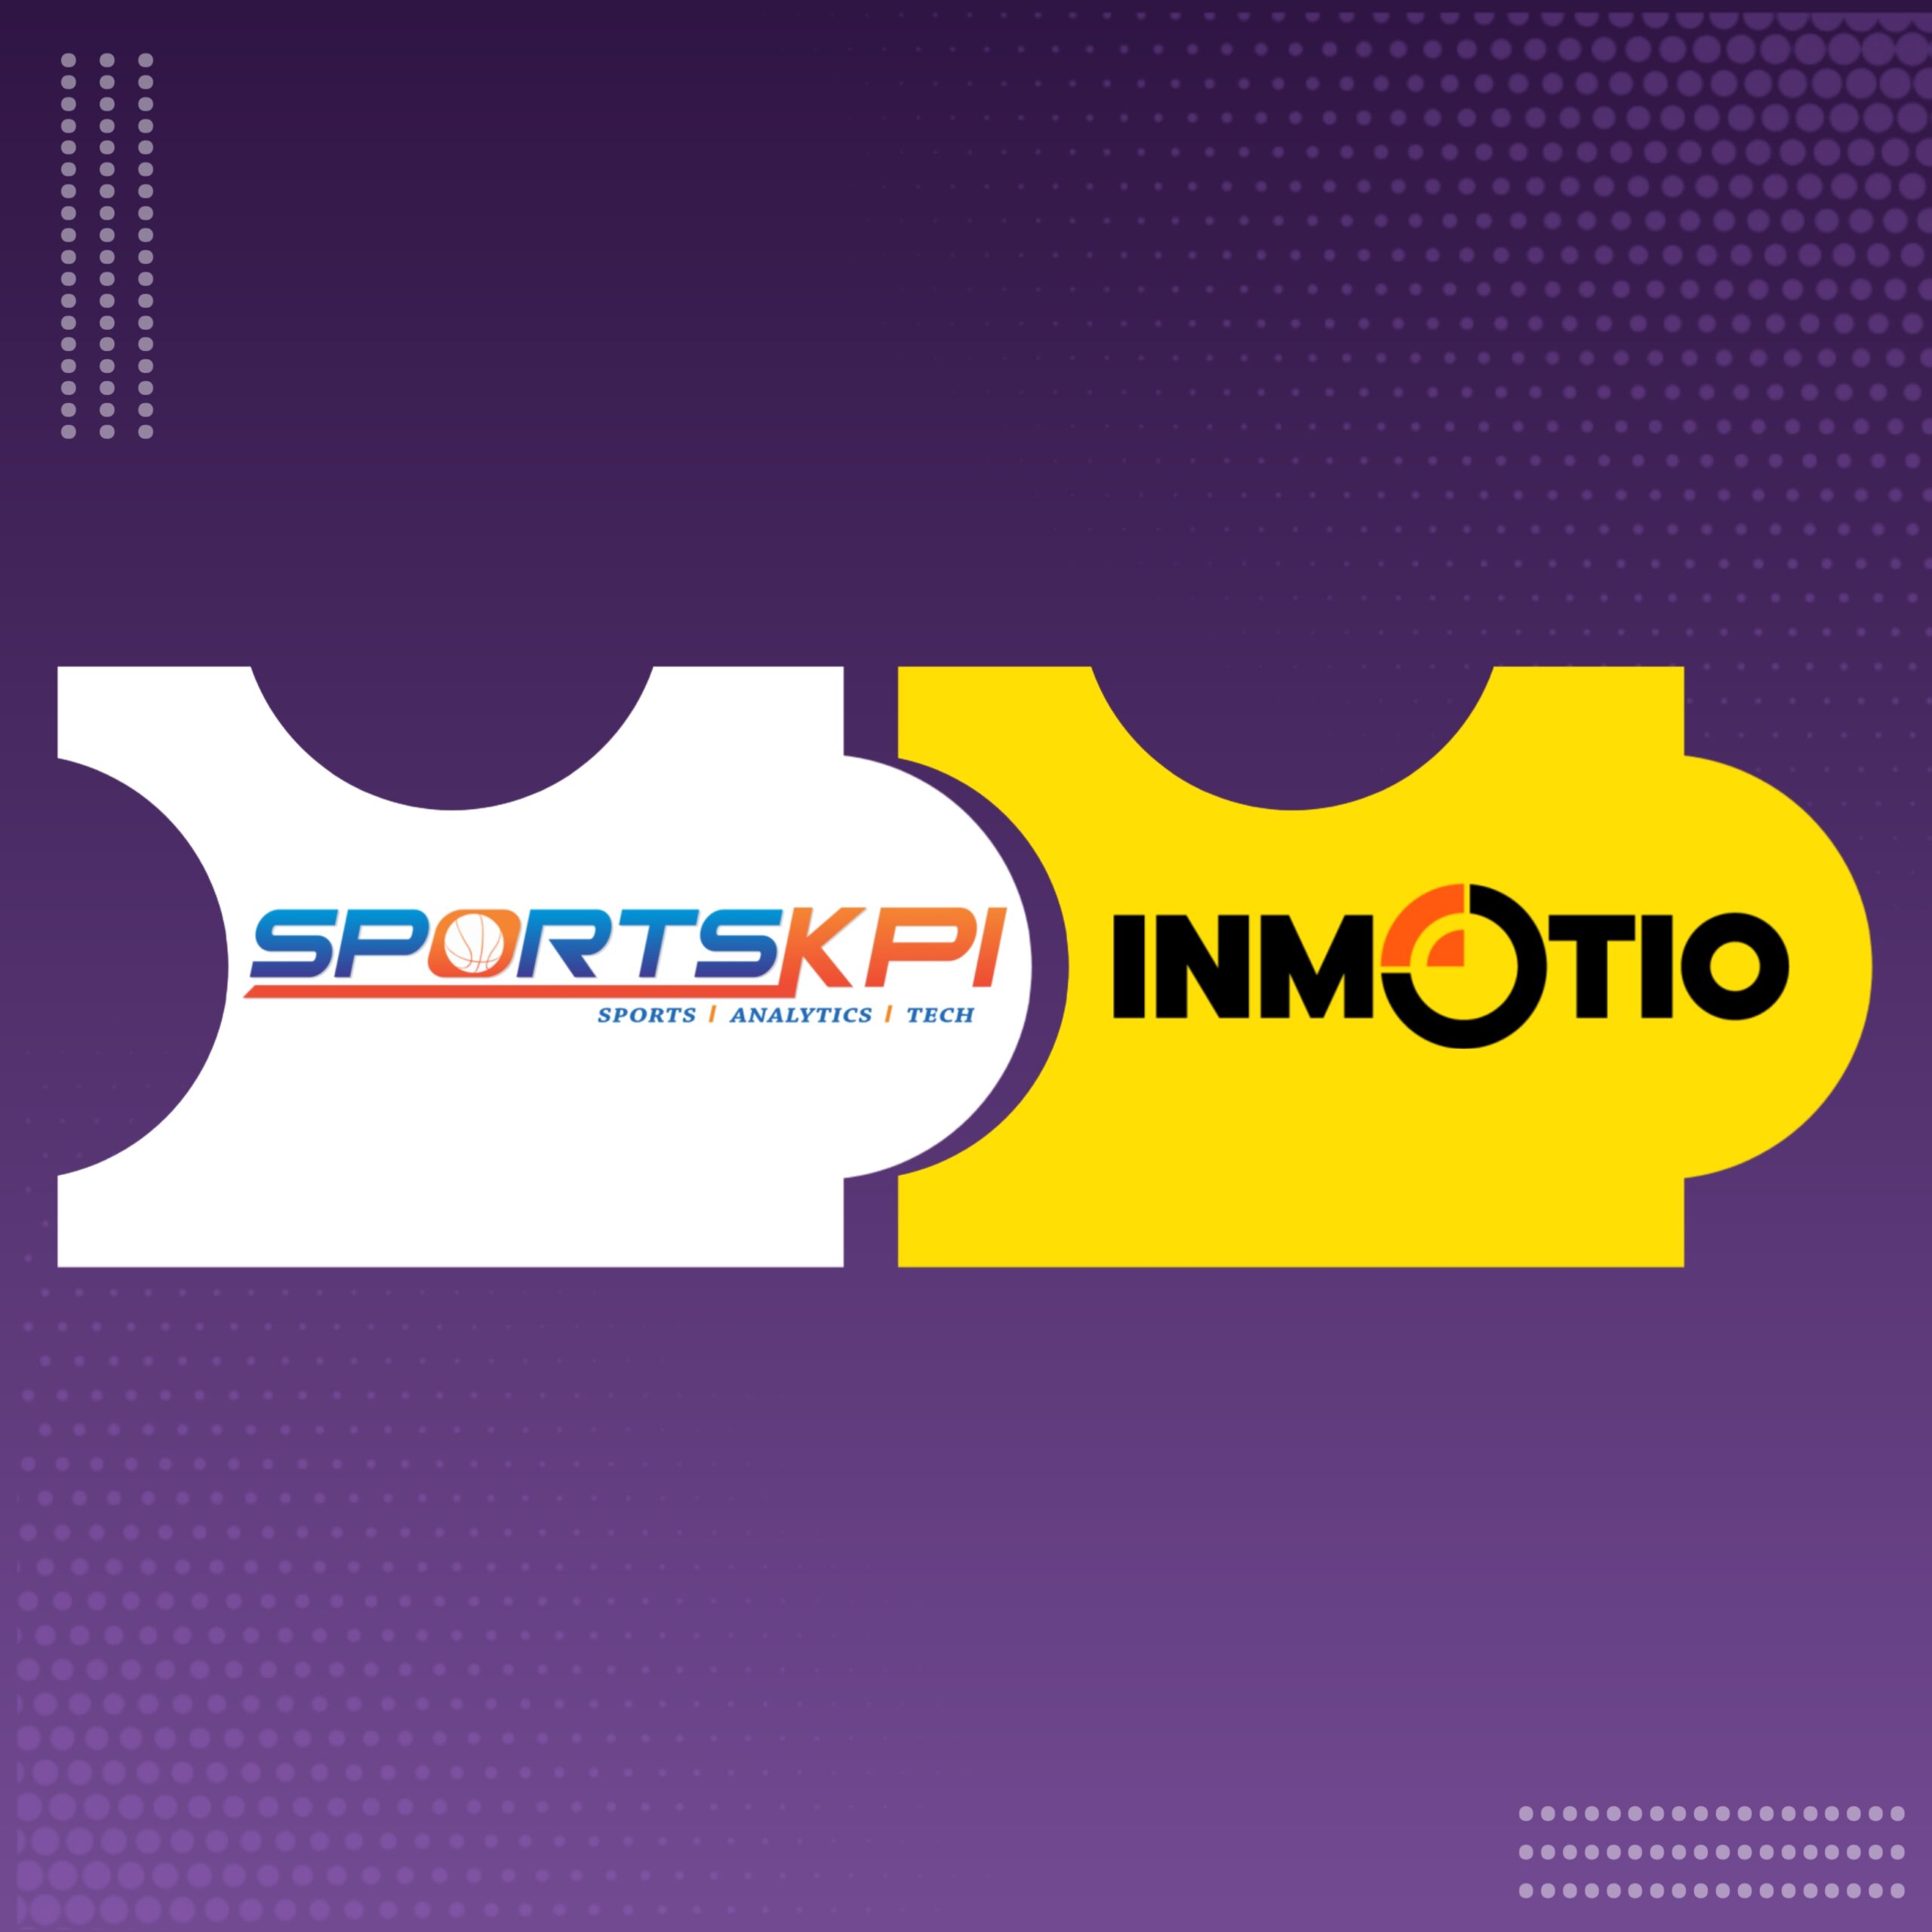 SportsKPI join hands with Inmotio for an Indo European Partnership